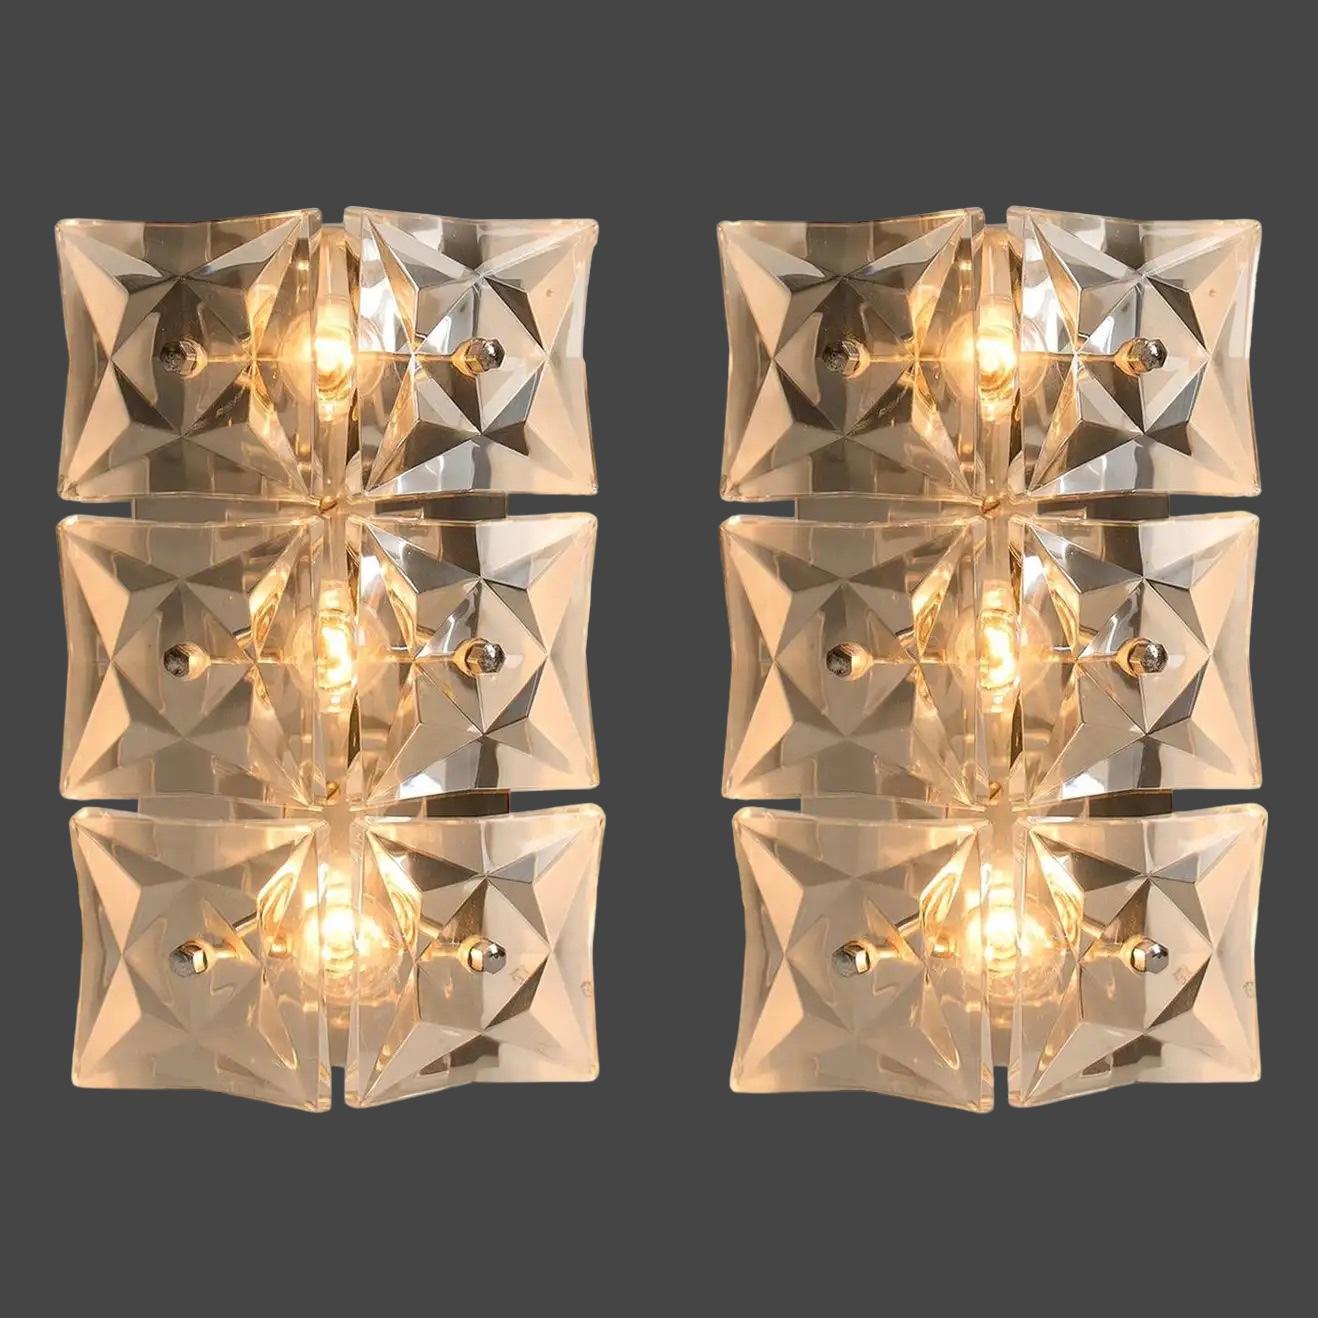 Elegant pair of stunning large wall lights with crystal glass panels. Each made of chrome plated metal and glass. Each fixture requires three European E14 light bulbs, up to 40 watts each. A nice addition to any room. Lightbulbs shown in the